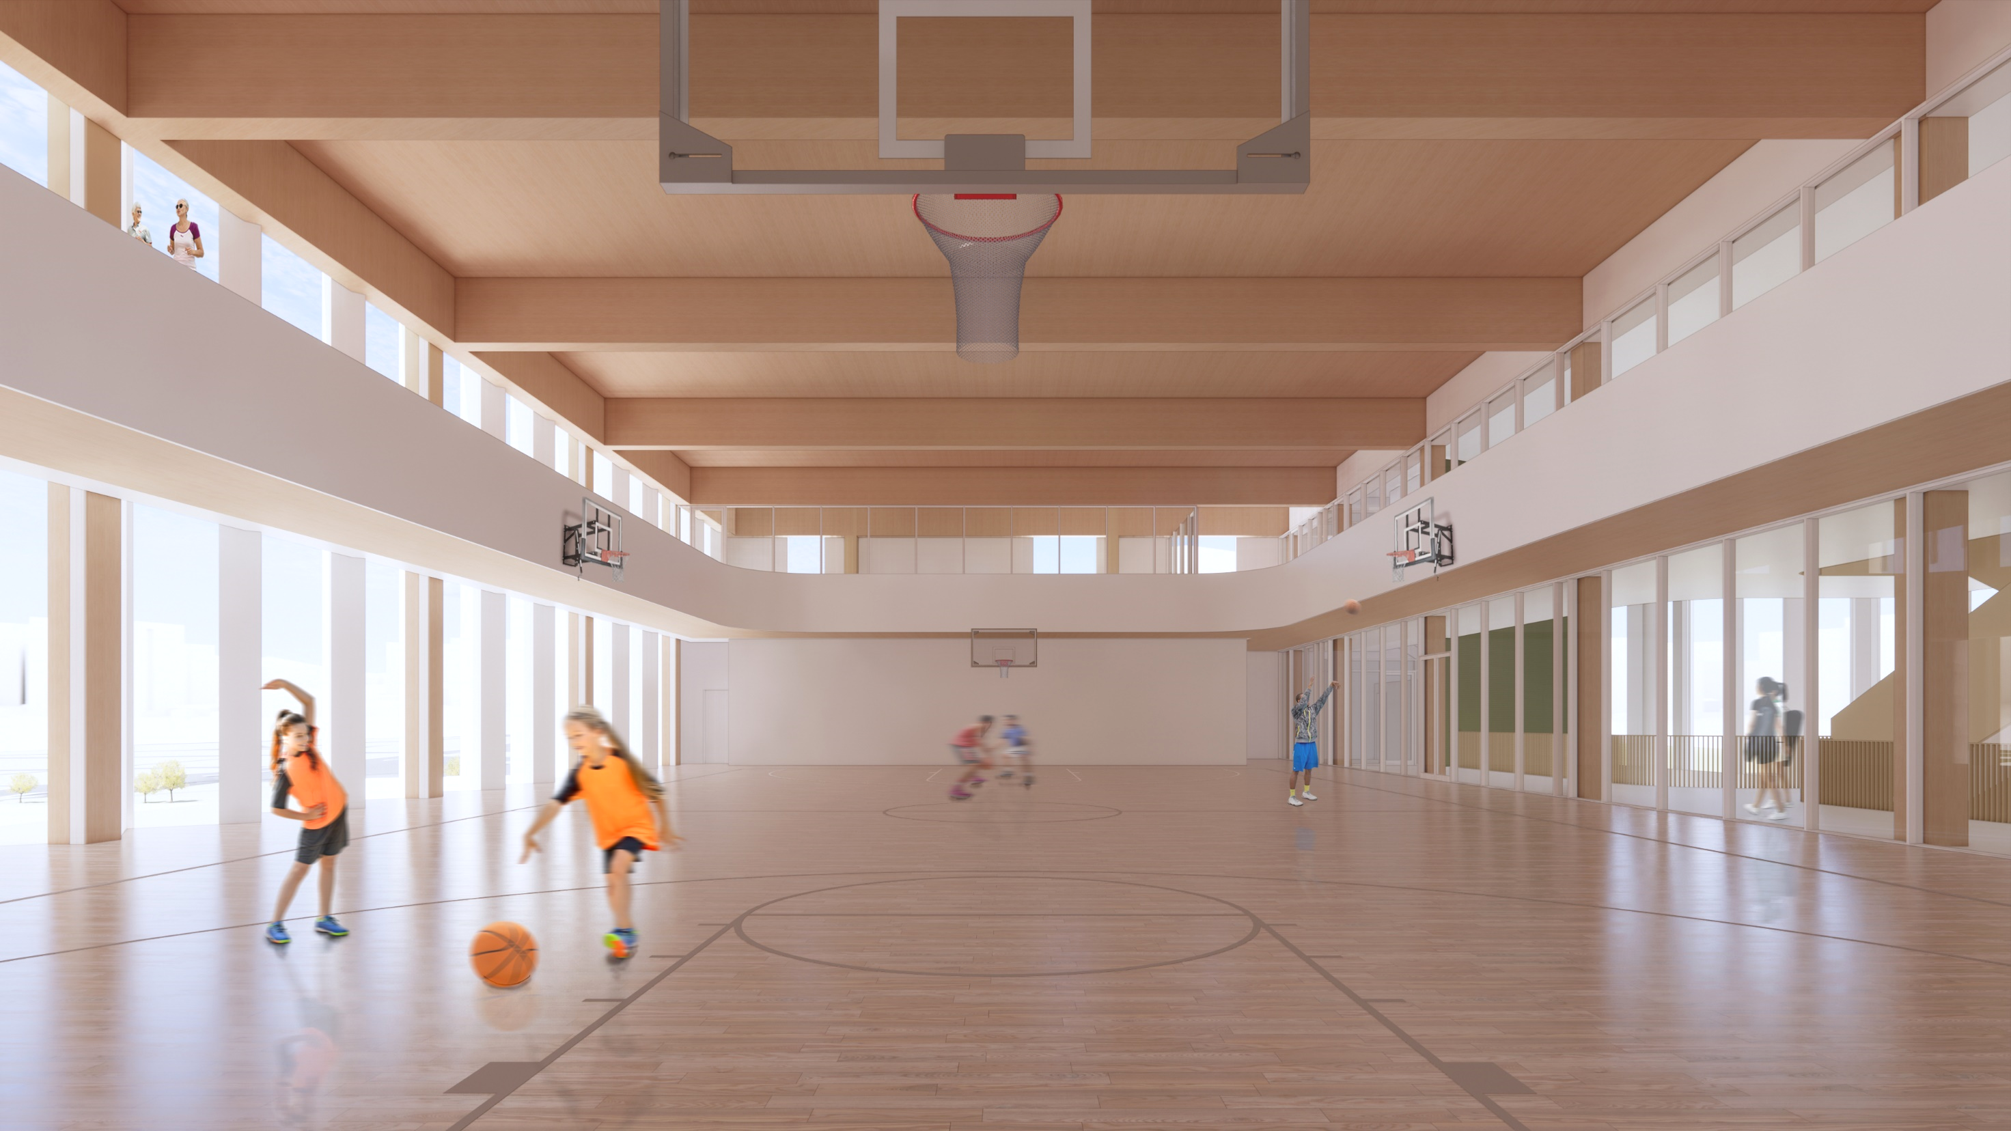 Draft design rendering of the double gymnasium with a western wall of glass and louvres and an eastern wall of glass facing an internal hallway. A raised running track is included on the top outer edge of the gymnasium space. In the gymnasium, people are playing basketball.